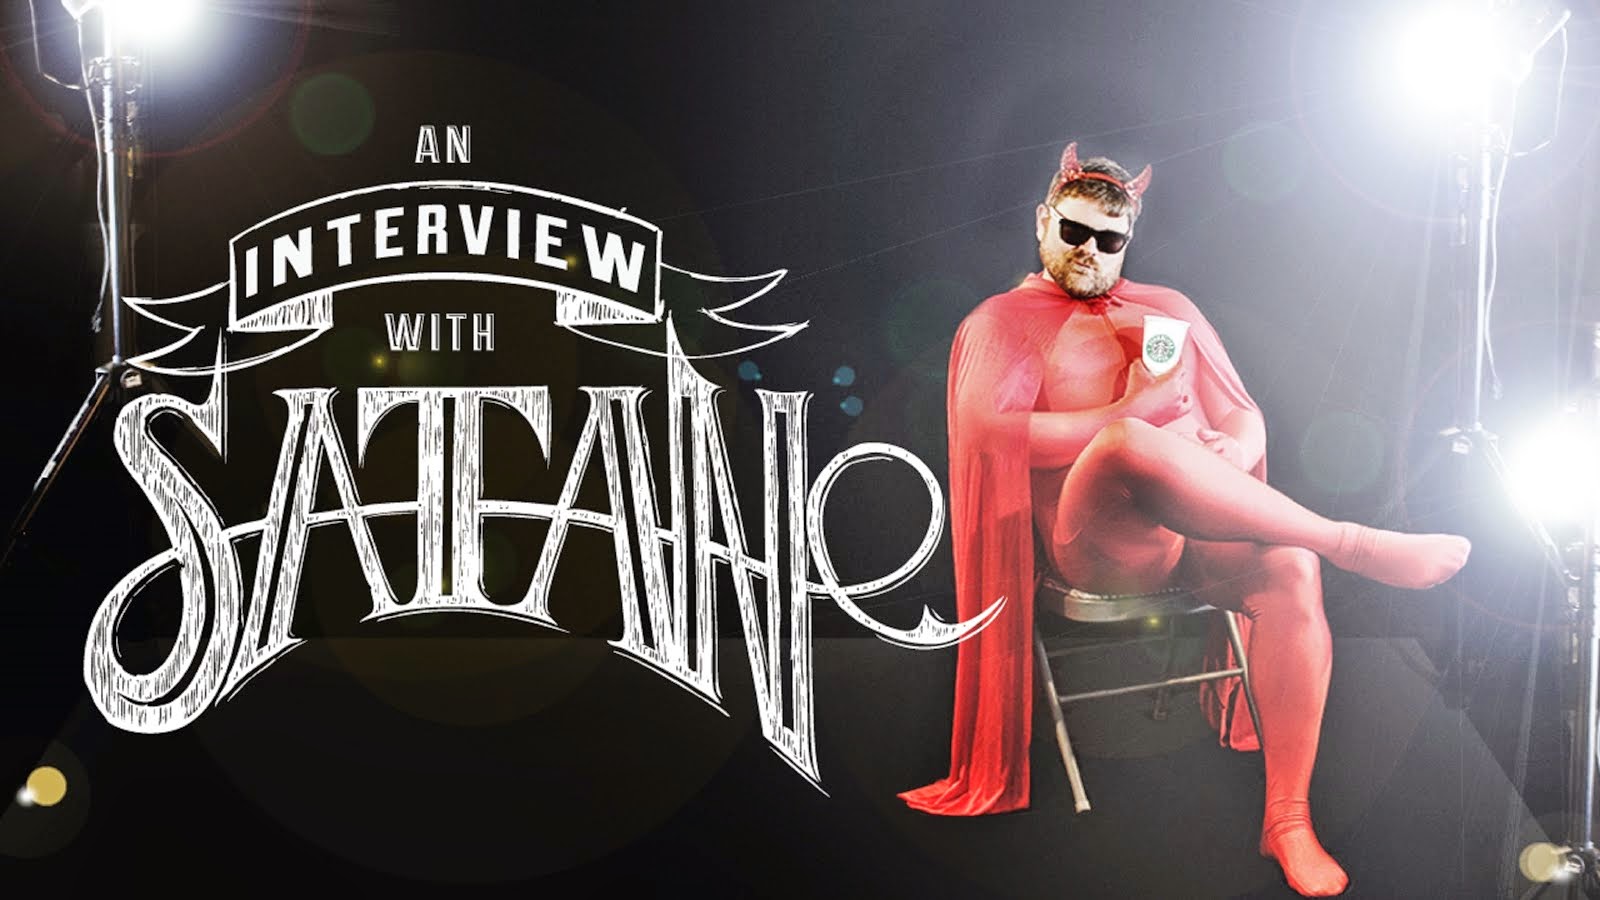 AN INTERVIEW WITH SATAN